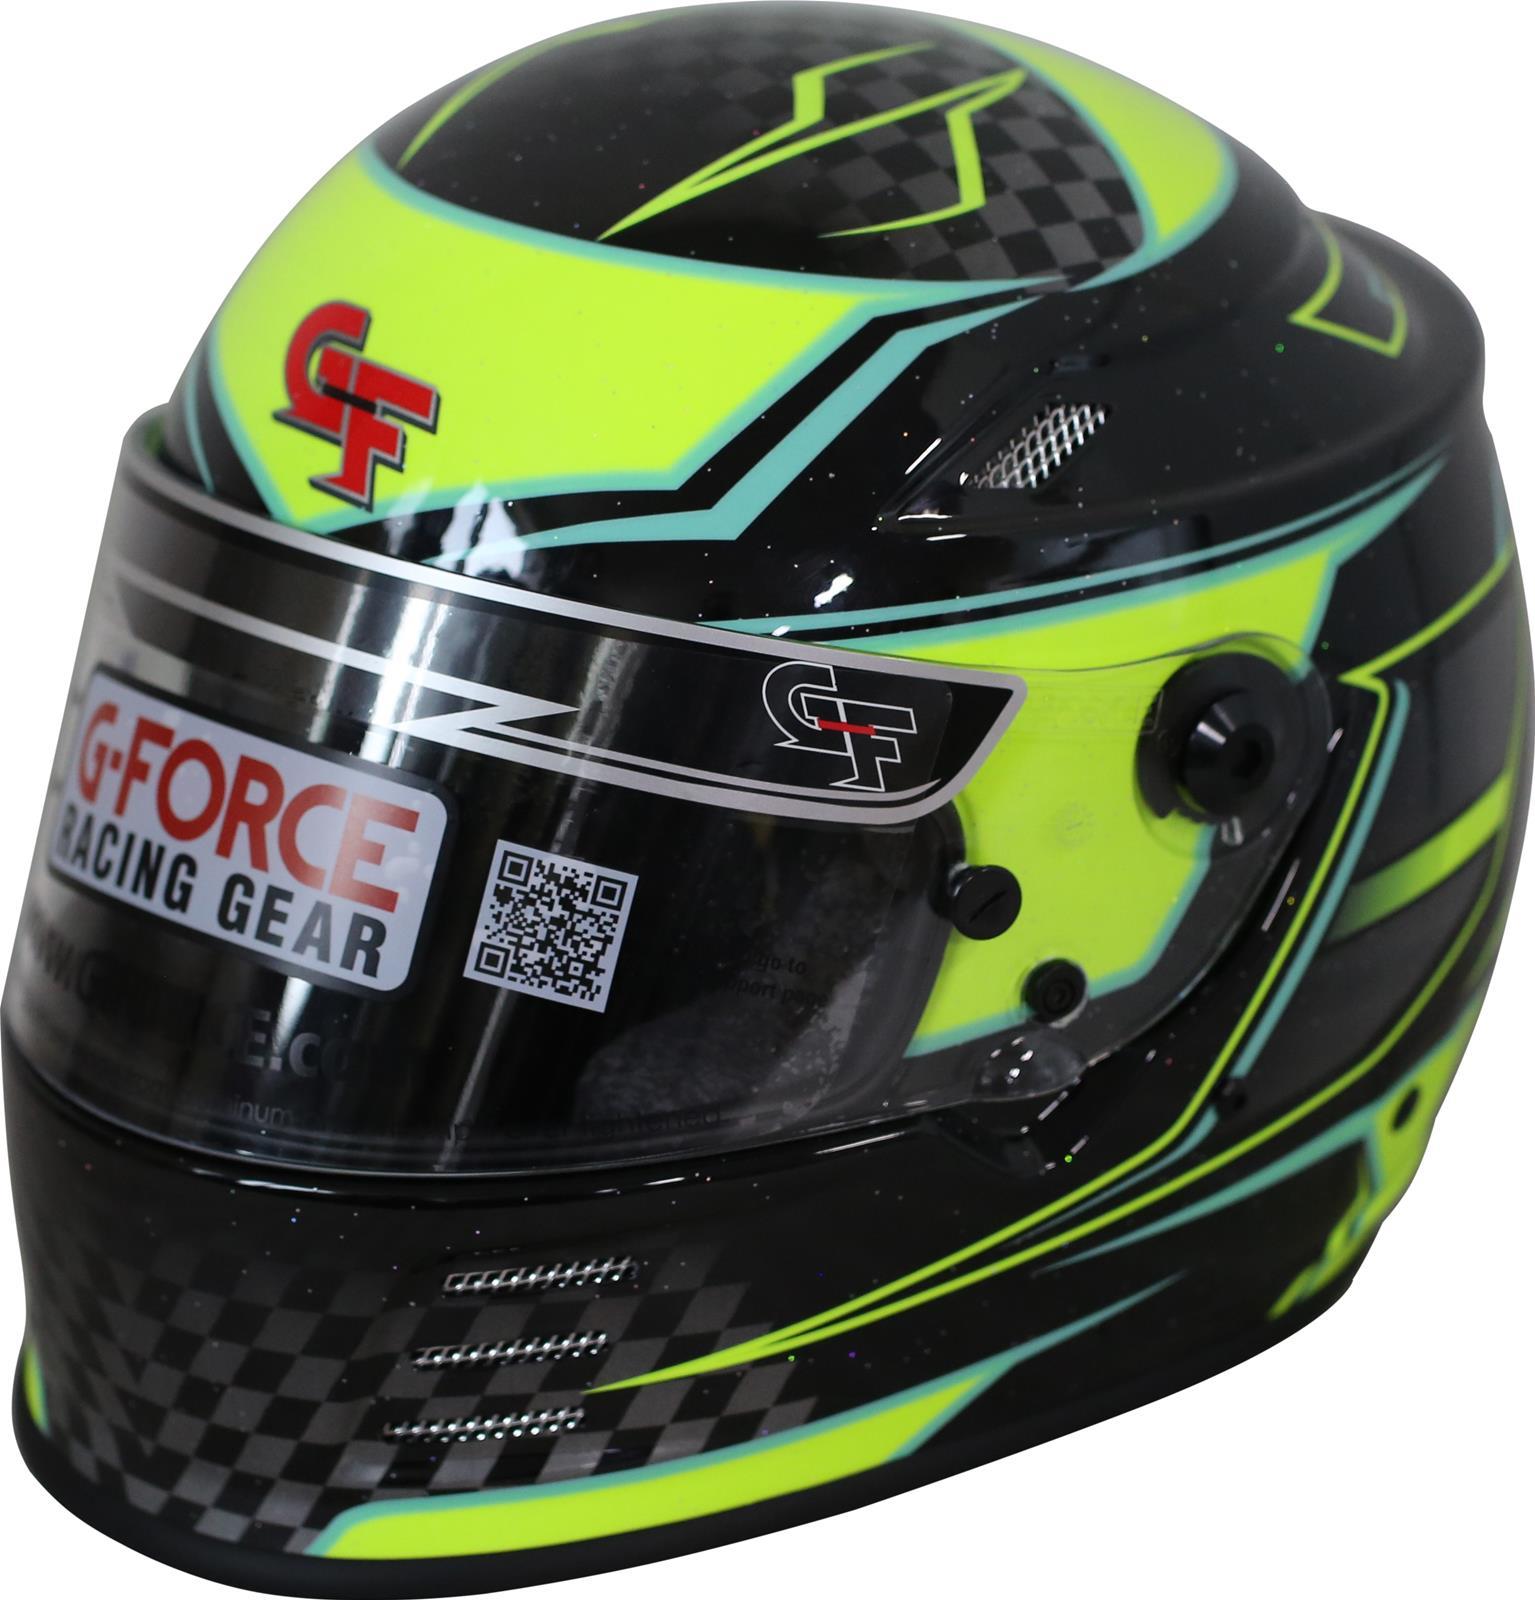 G-Force Racing Gear 13005SMLYL Helmet, Revo Graphics, Full Face, Snell SA2020, Head and Neck Support Ready, Black / Yellow, Small, Each